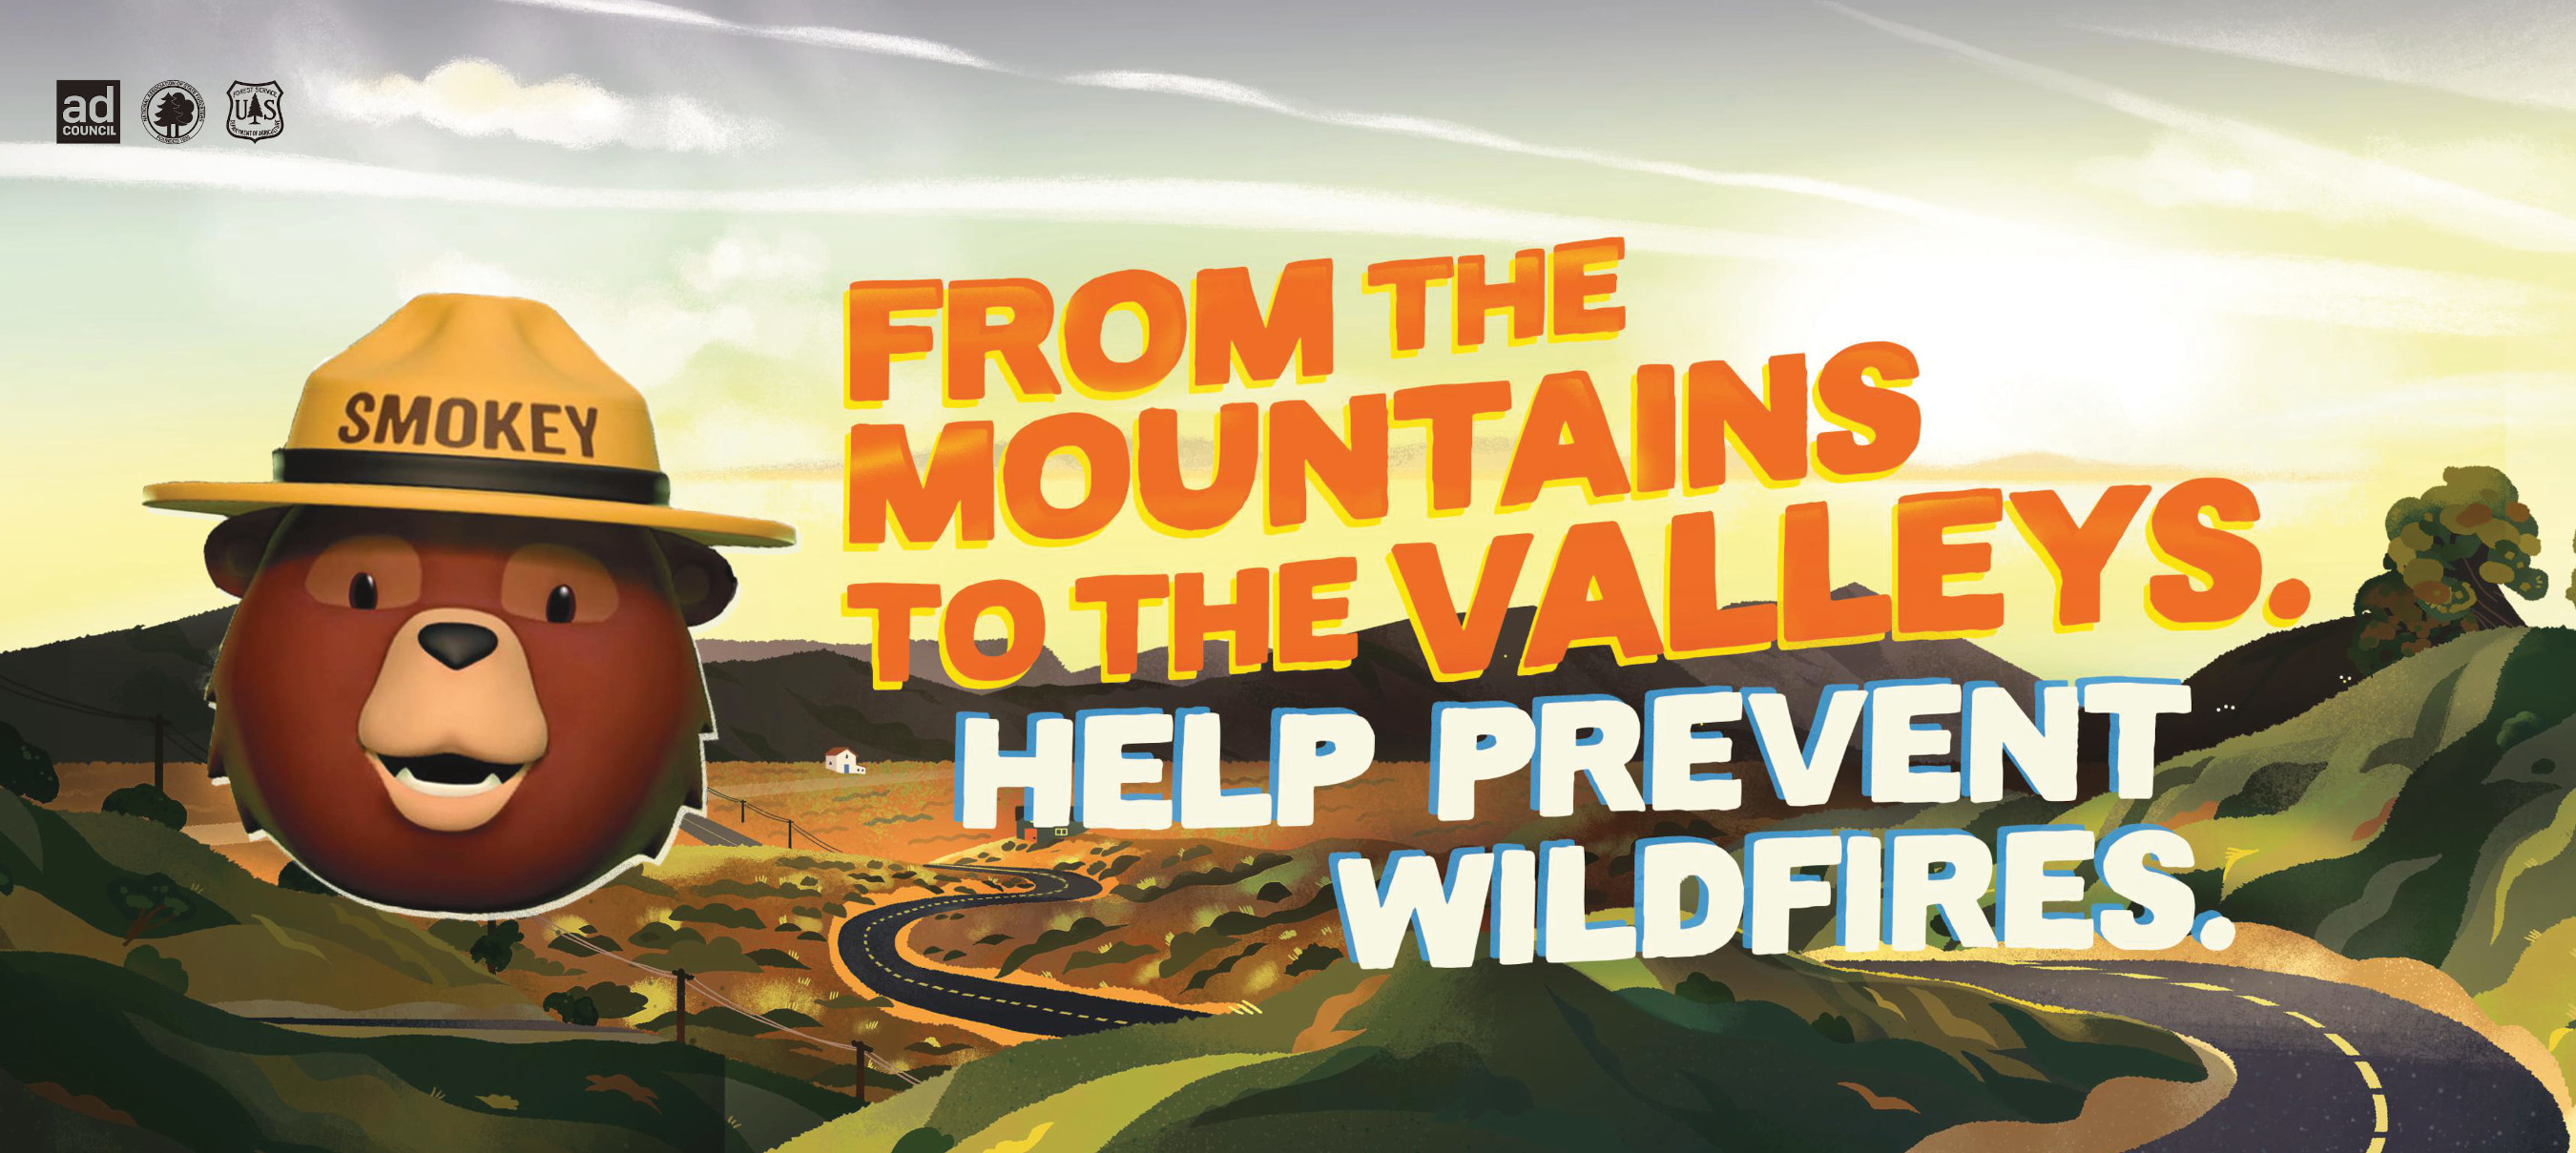 Smokey Bear OOH for Mountains and Valleys | Wildfire Prevention | Ad Council